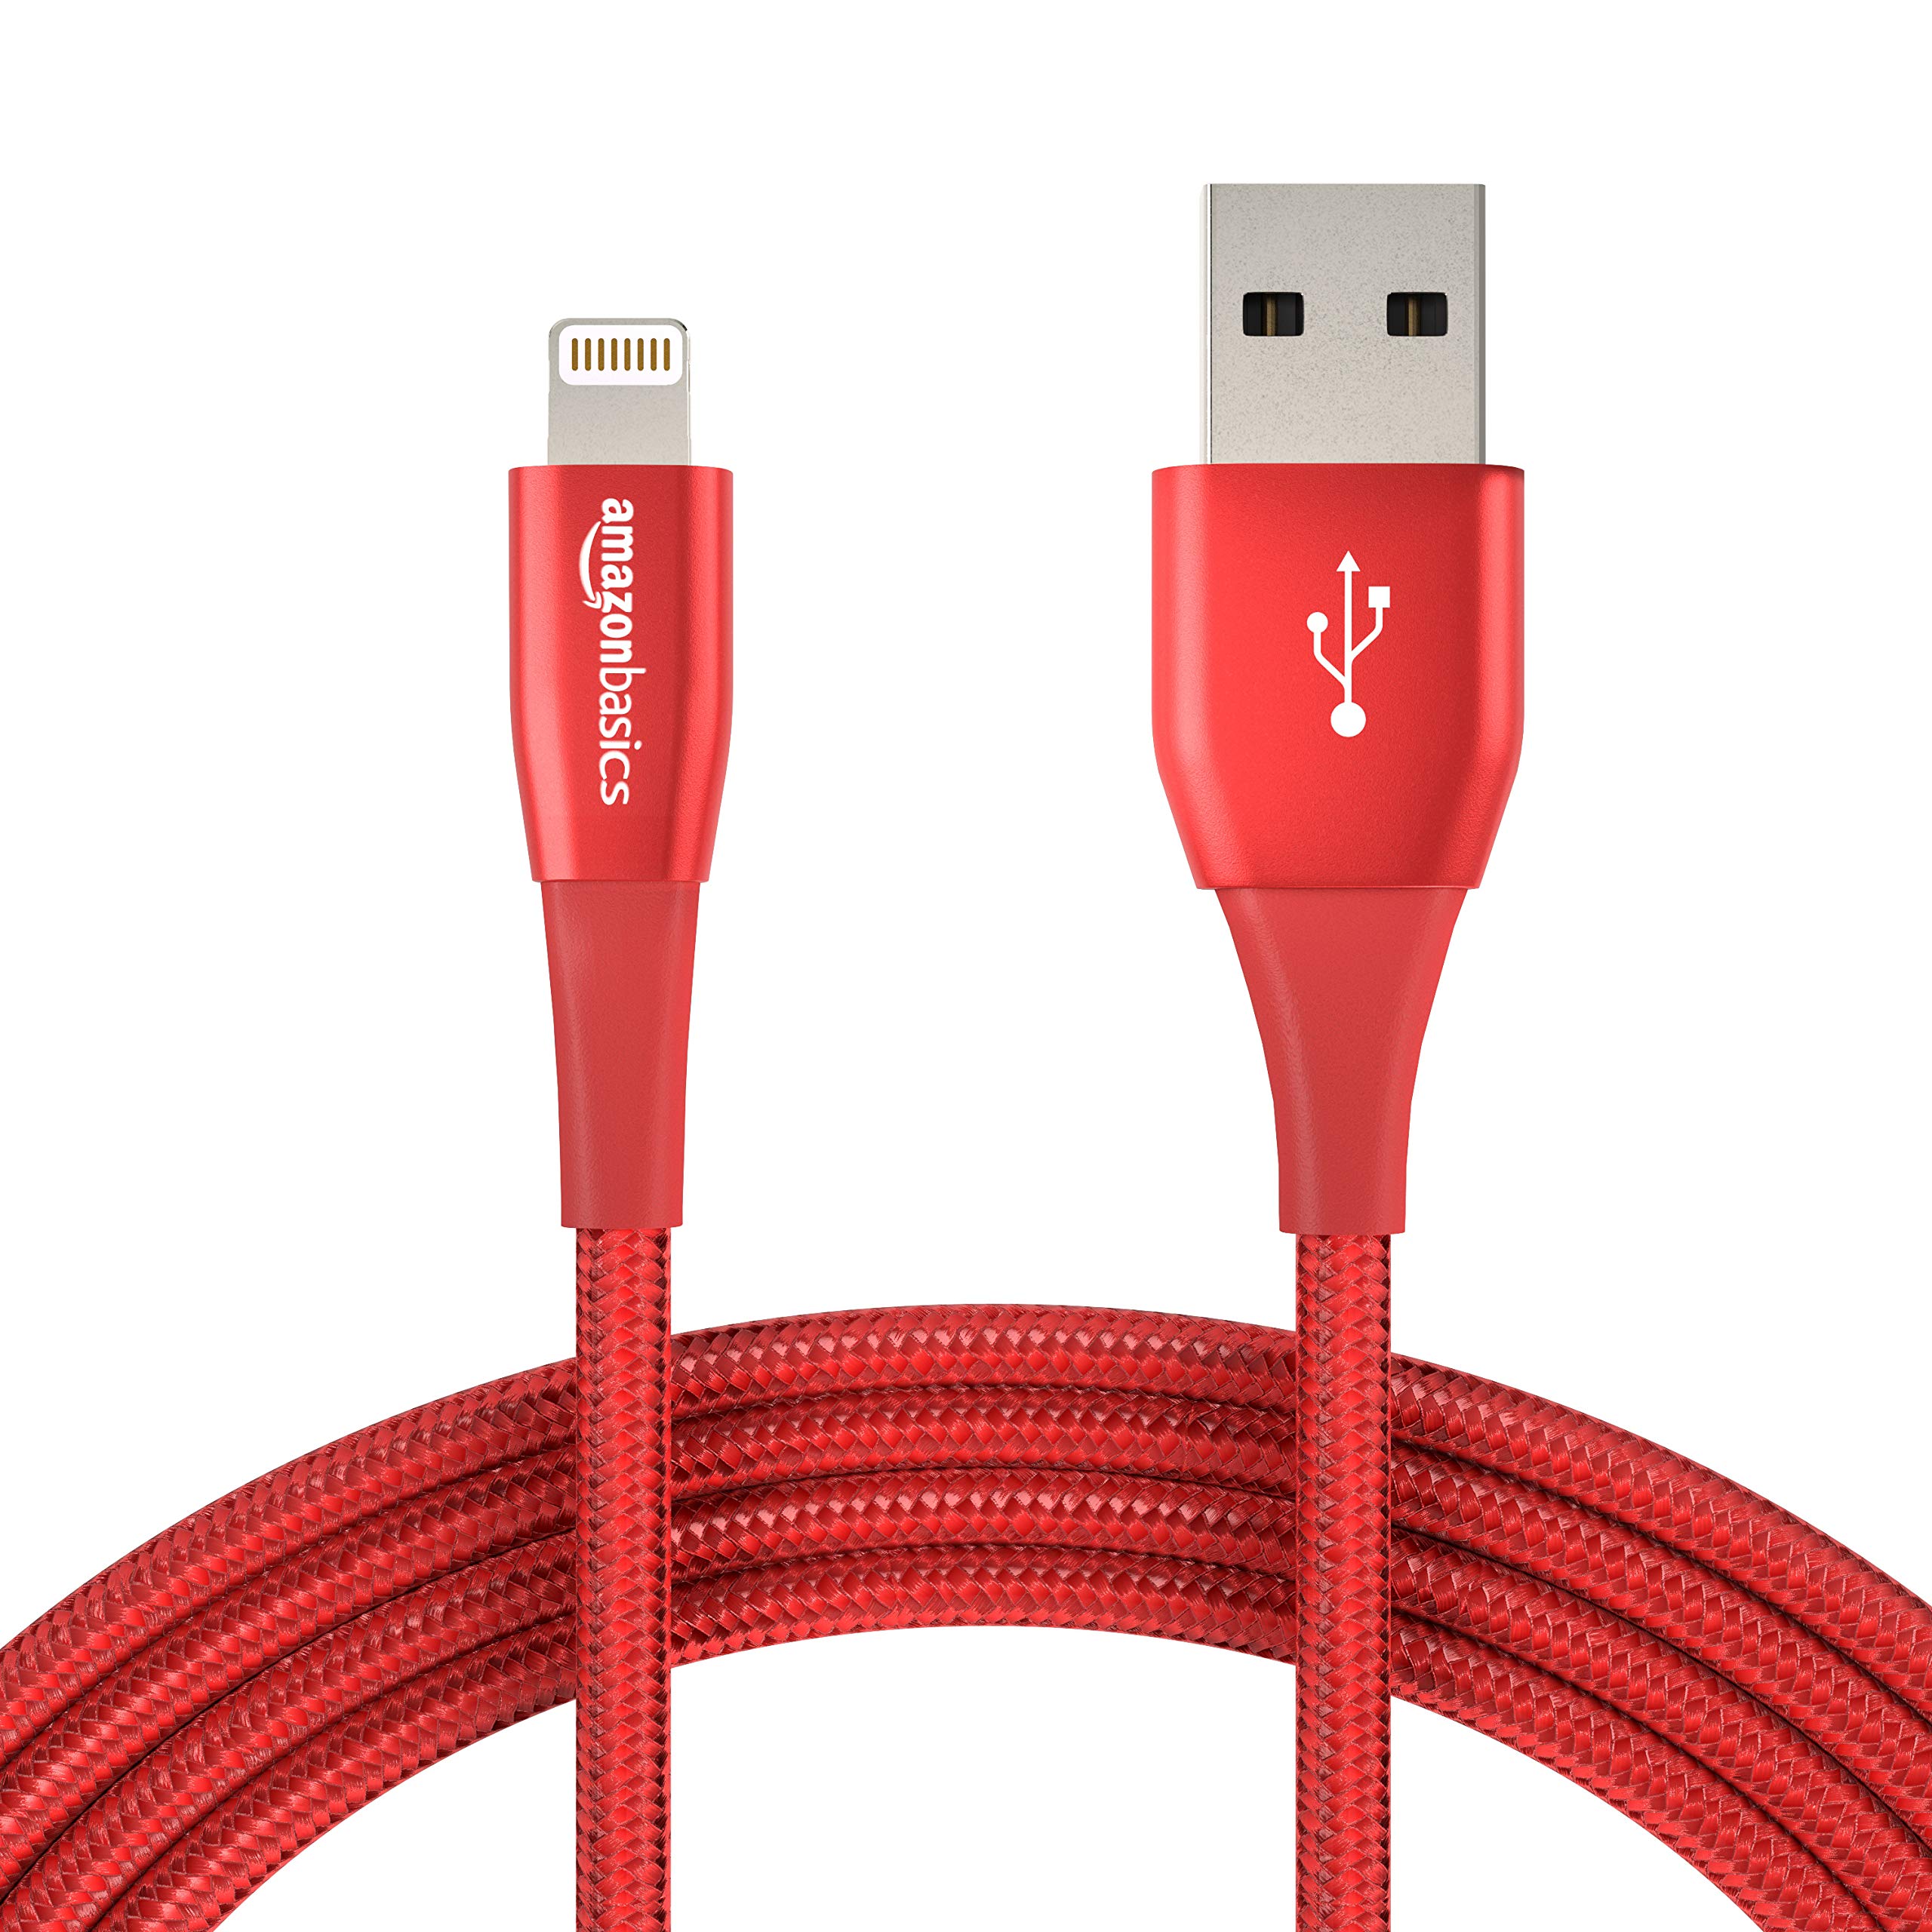 Book Cover Amazon Basics Double Nylon Braided USB A Cable with Apple Lightning Connector, Premium Collection - 10-Foot, 12-Pack - Red Red 12-Pack 10-Foot Cable